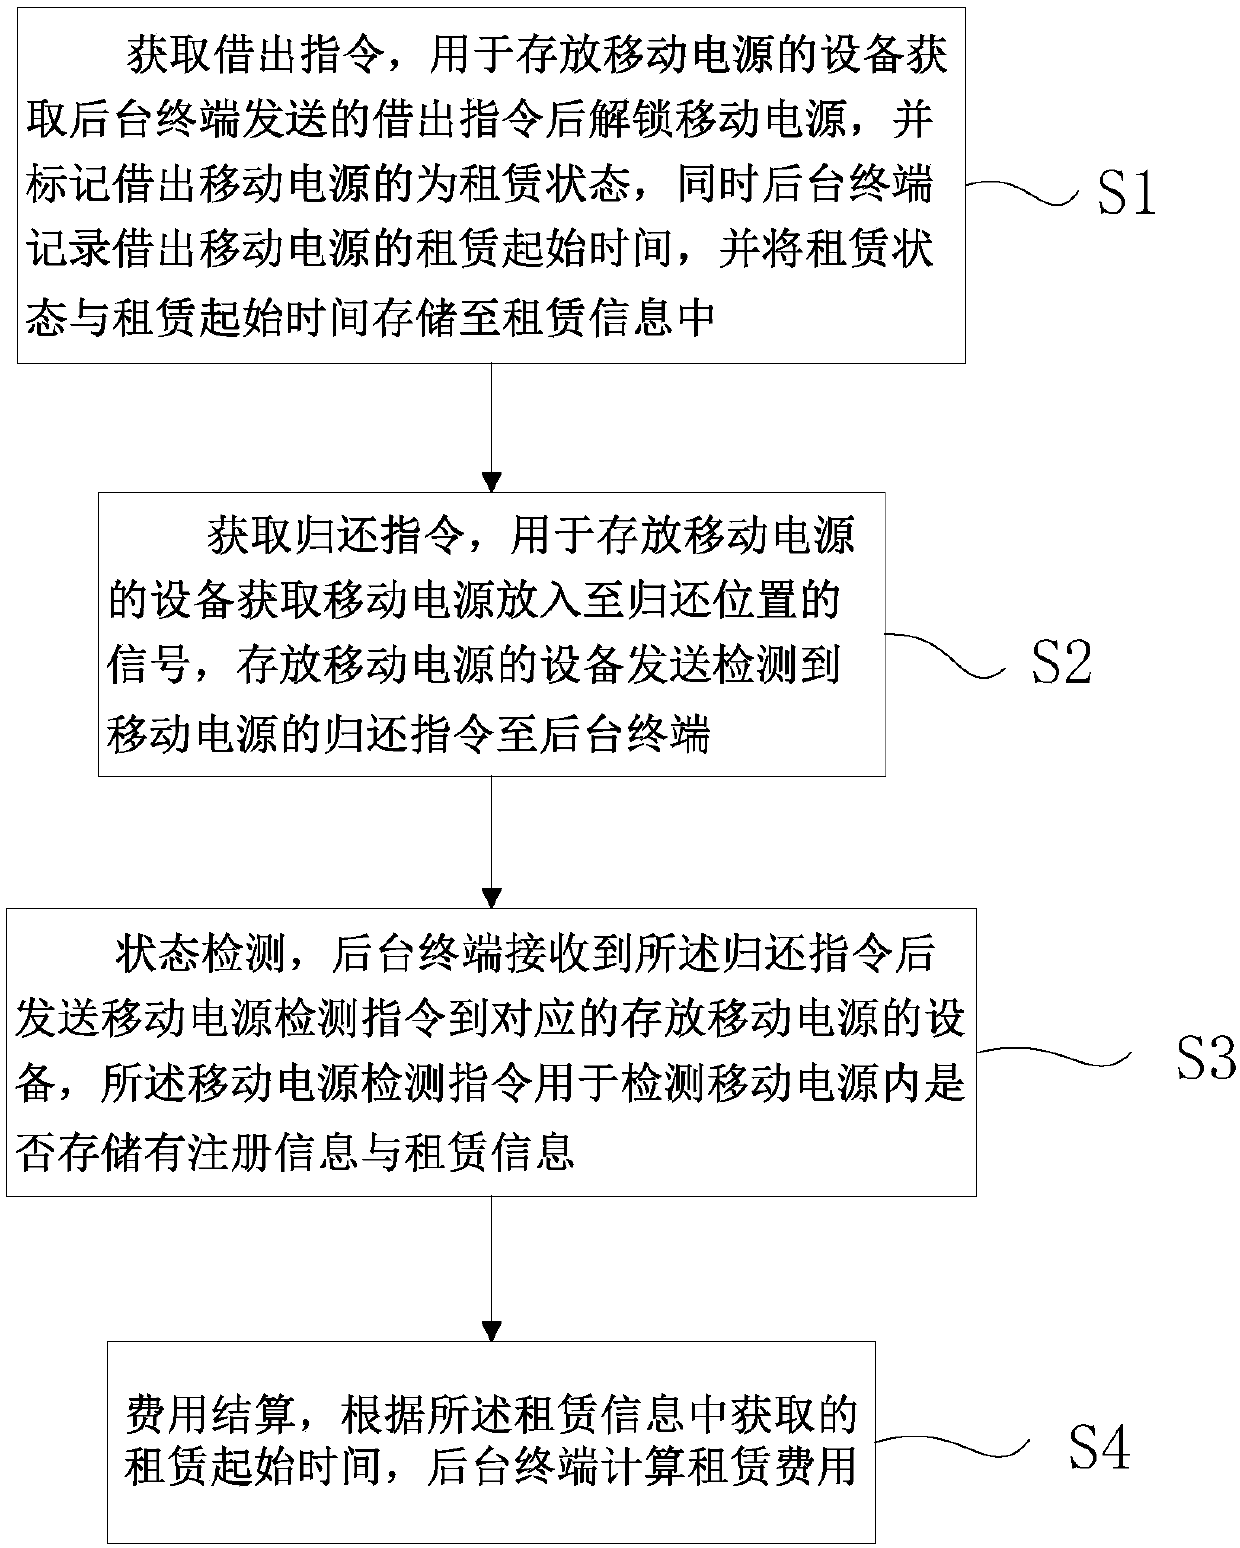 Mobile power supply lease management method, storage medium and electronic device